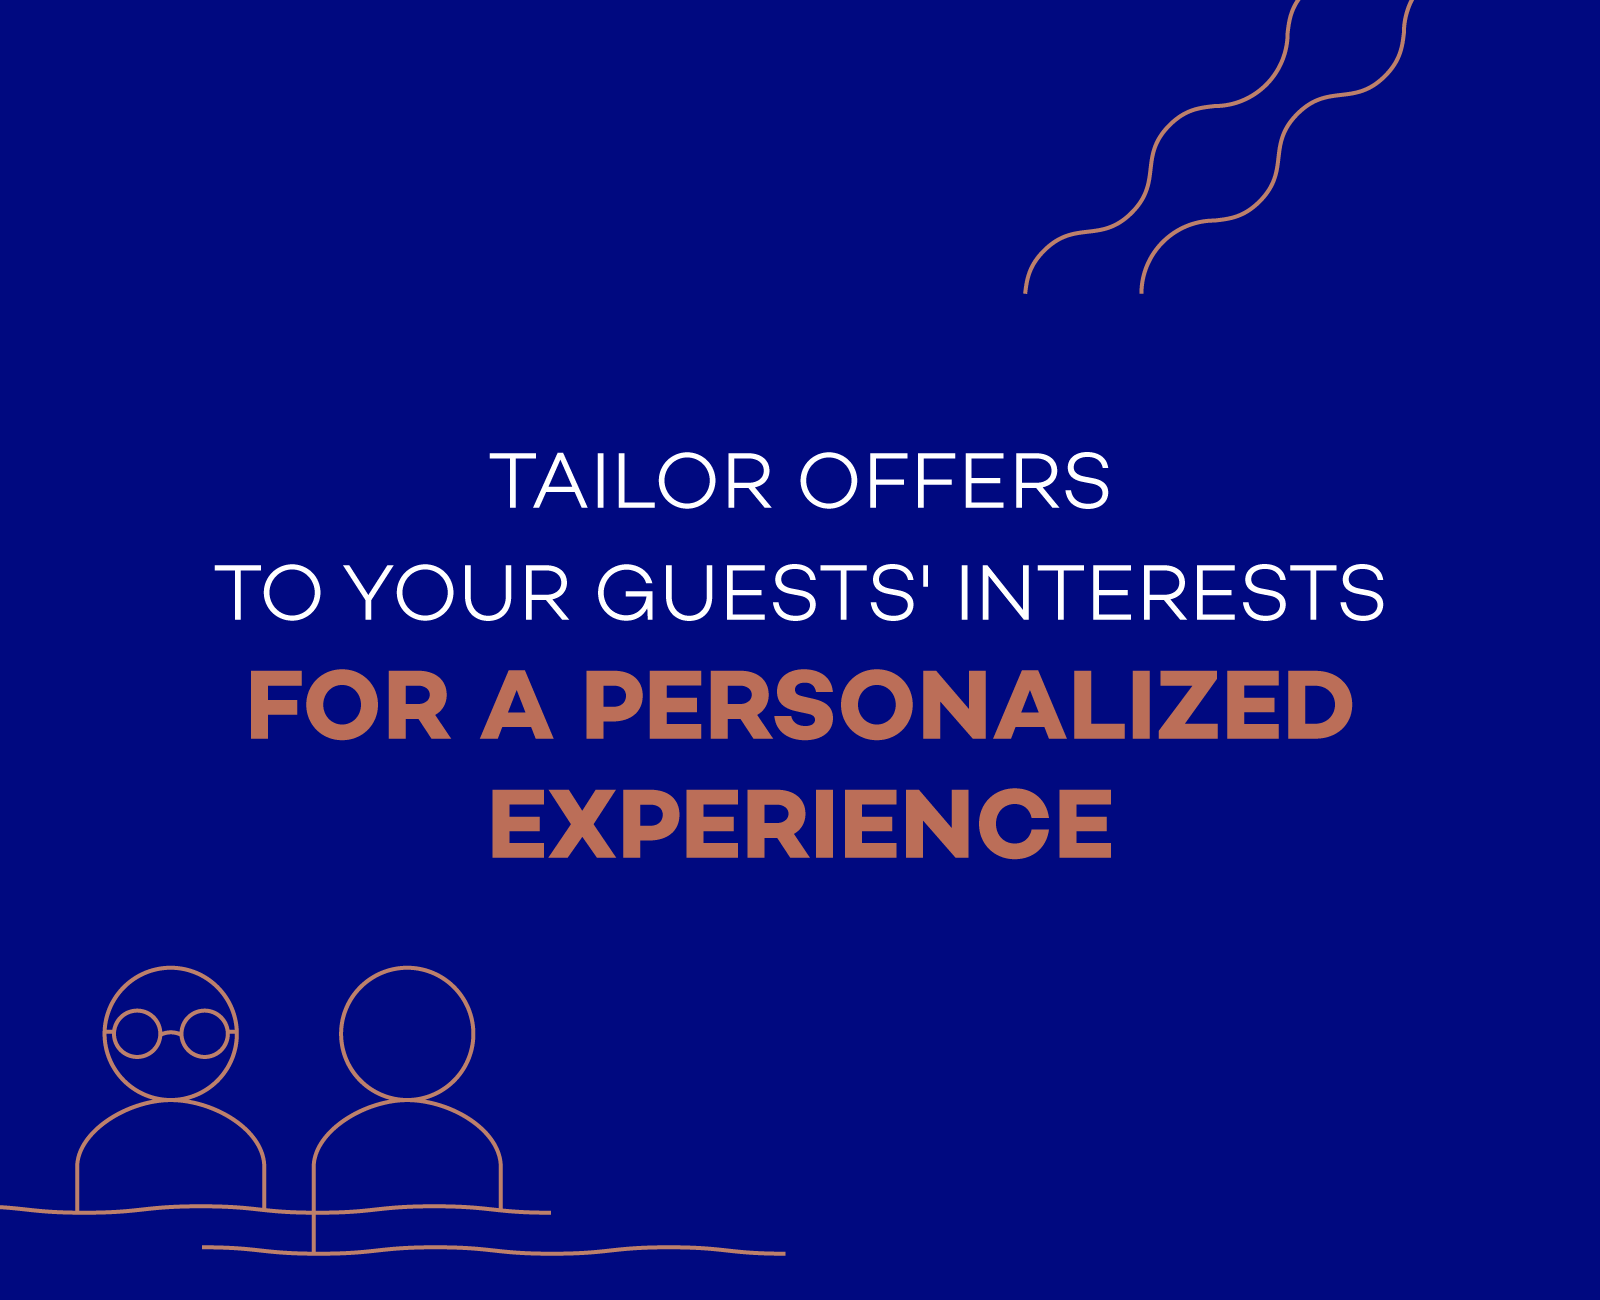 Tailor offers to your guest's interests for a personalized experience